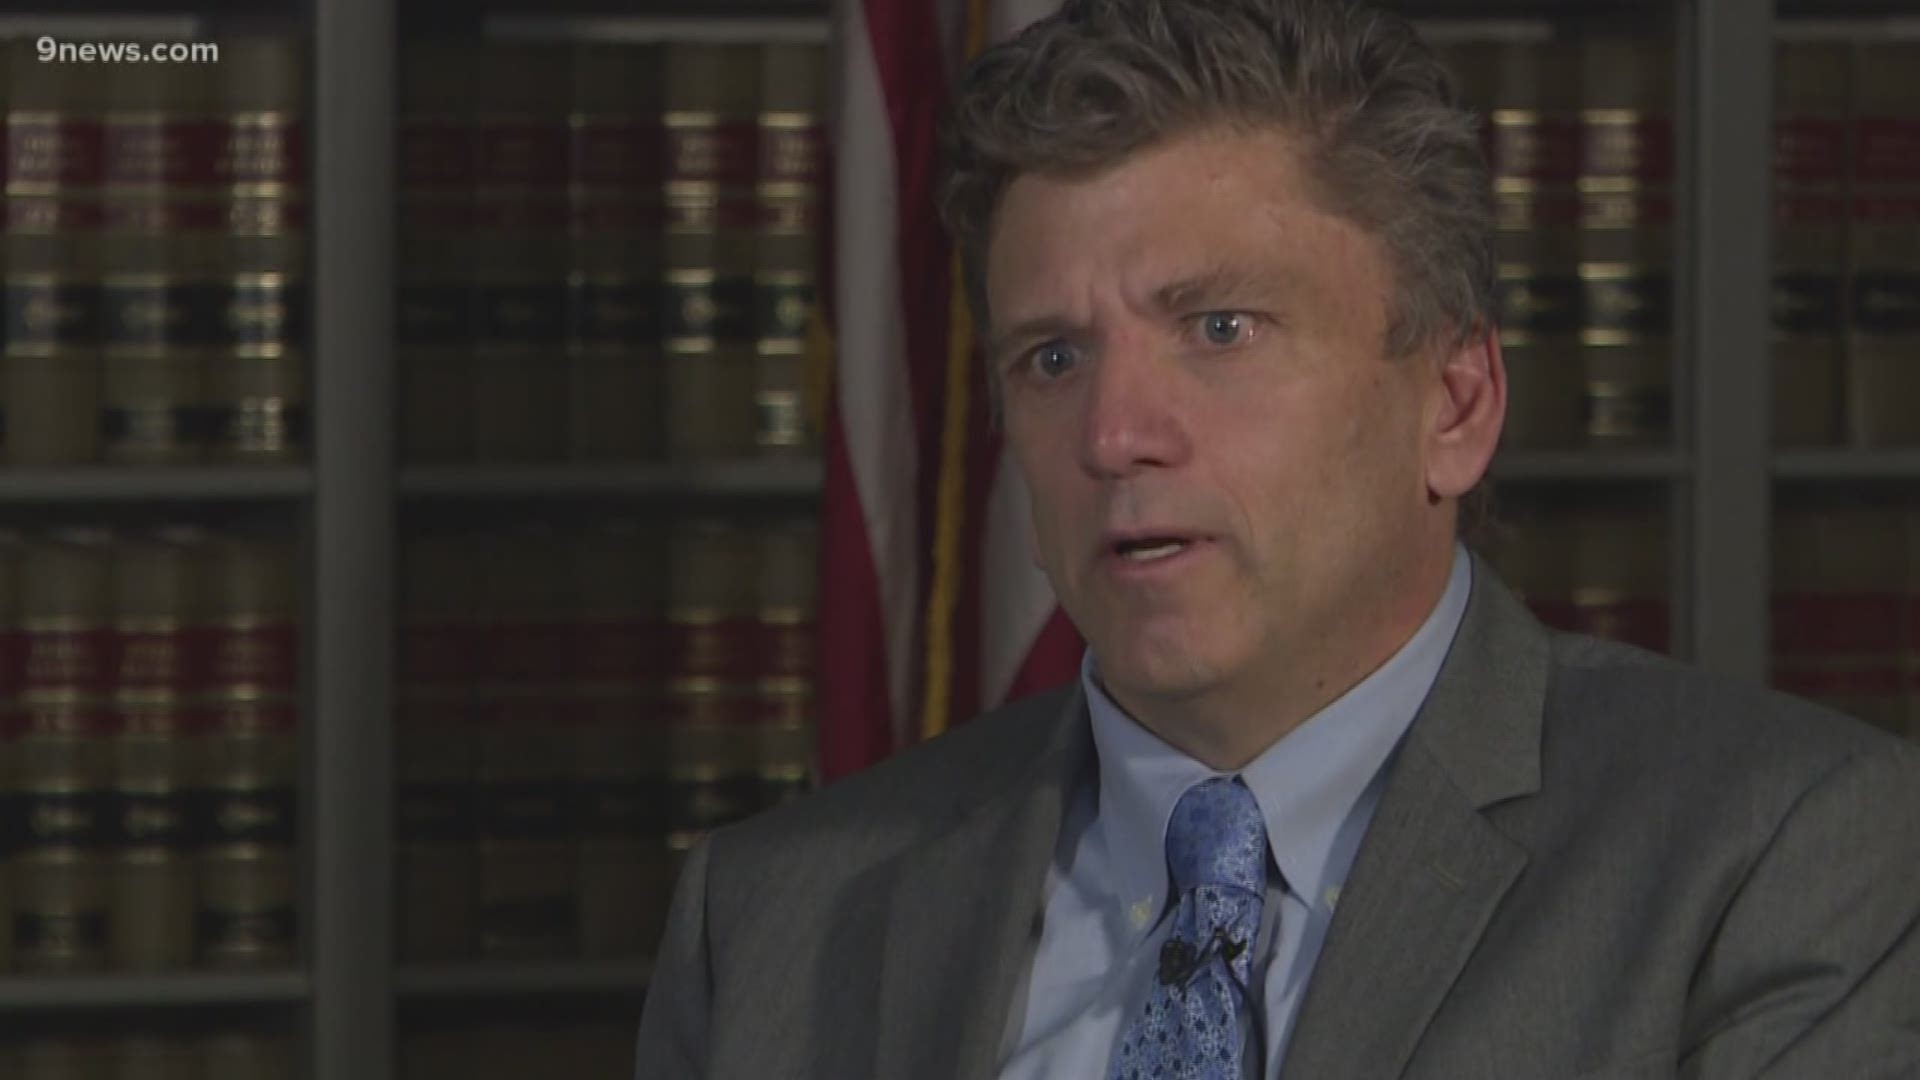 Colorado Politics is reporting Assistant District Attorney, Ryan Brackley, will leave his post this Friday. Brackley was second in command under District Attorney Beth McMann.